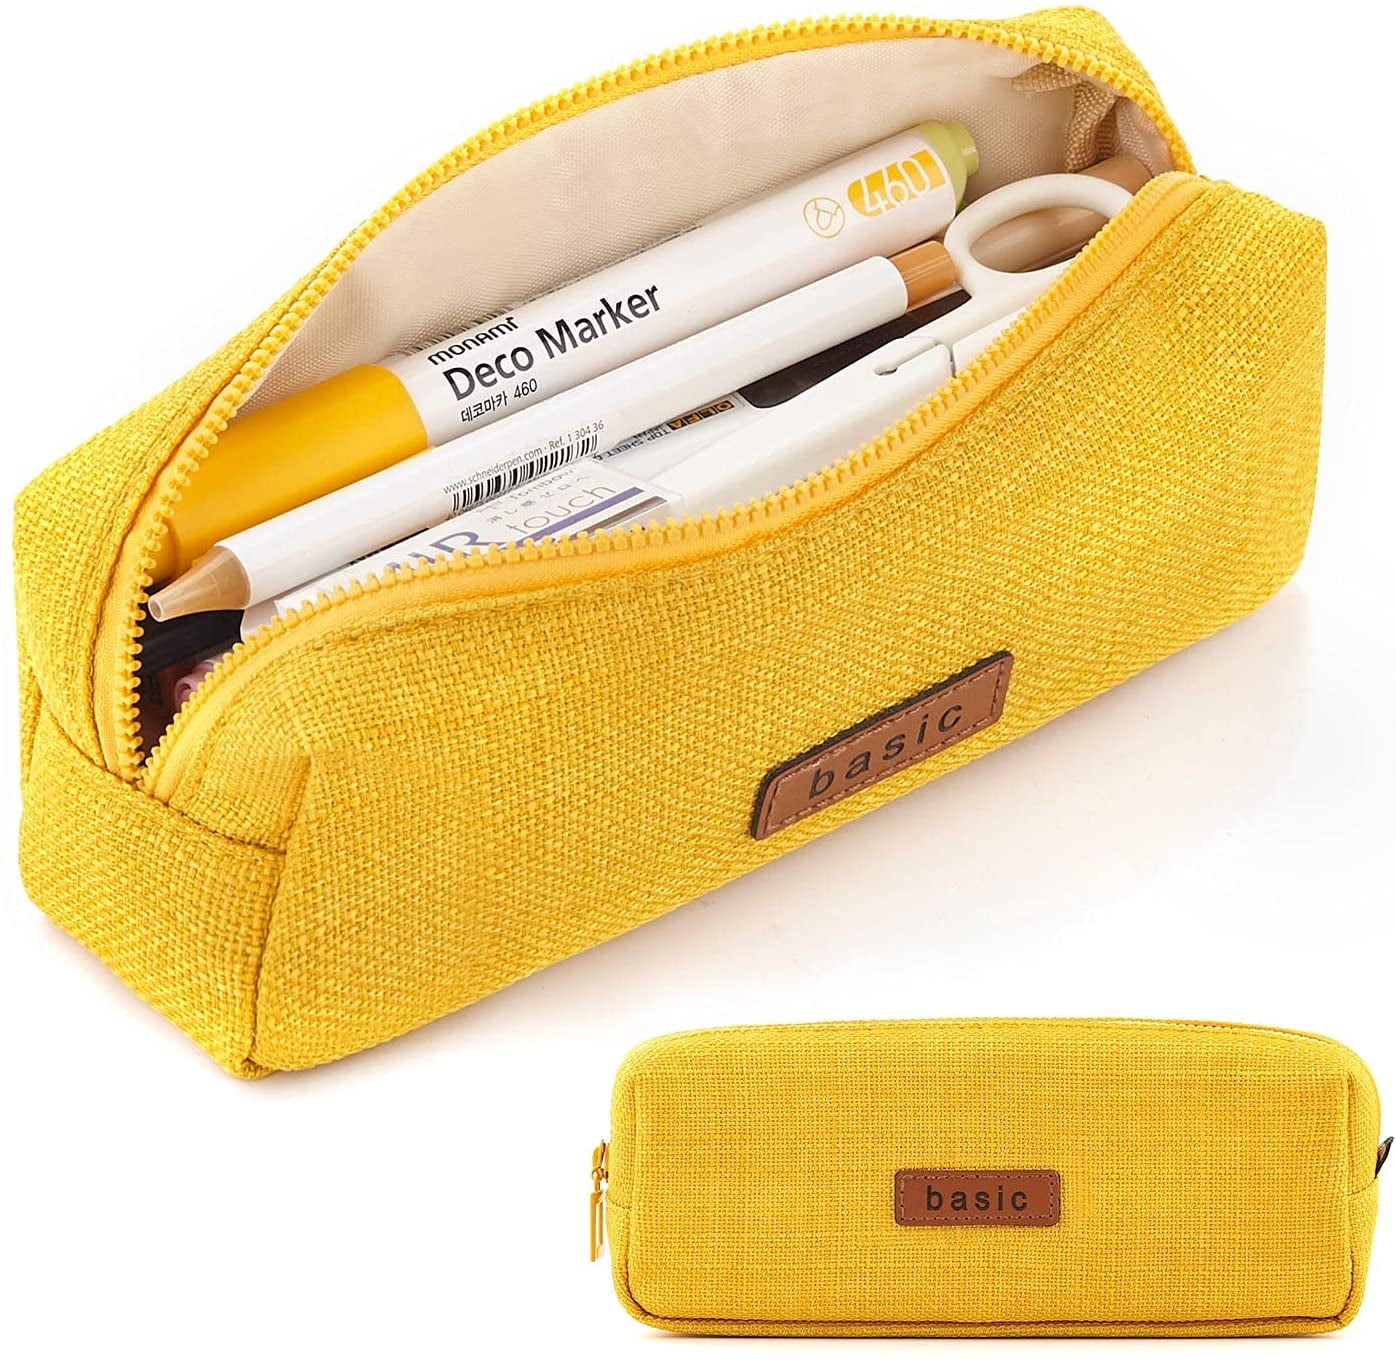 MONNO HOME Stylish and Aesthetic Pencil Case - Cute Pencil Pouch -  Aesthetic Stuff - Pencil Bag - Cute Pencil Case - Stationary Supplies  Organizer for